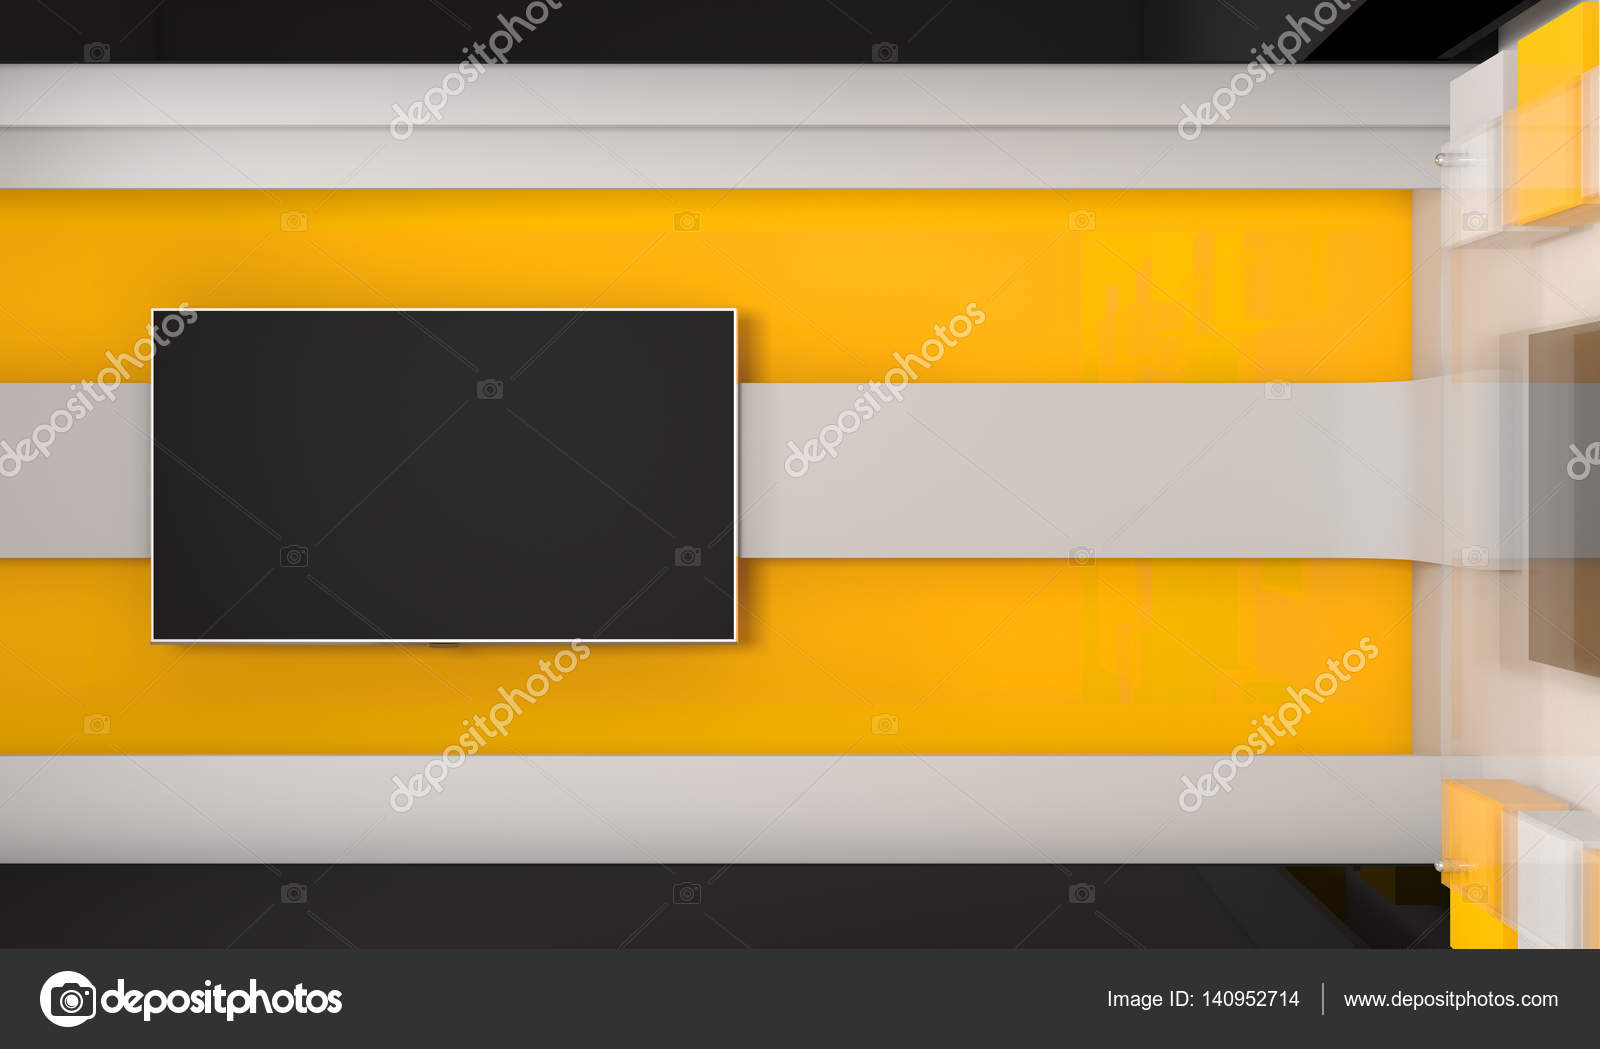 Tv Studio Backdrop For Tv Shows Tv On Wall News Studio The Perfect Backdrop For Any Green Screen Or Chroma Key Video Or Photo Production 3d Render Stock Photo By C Vachom